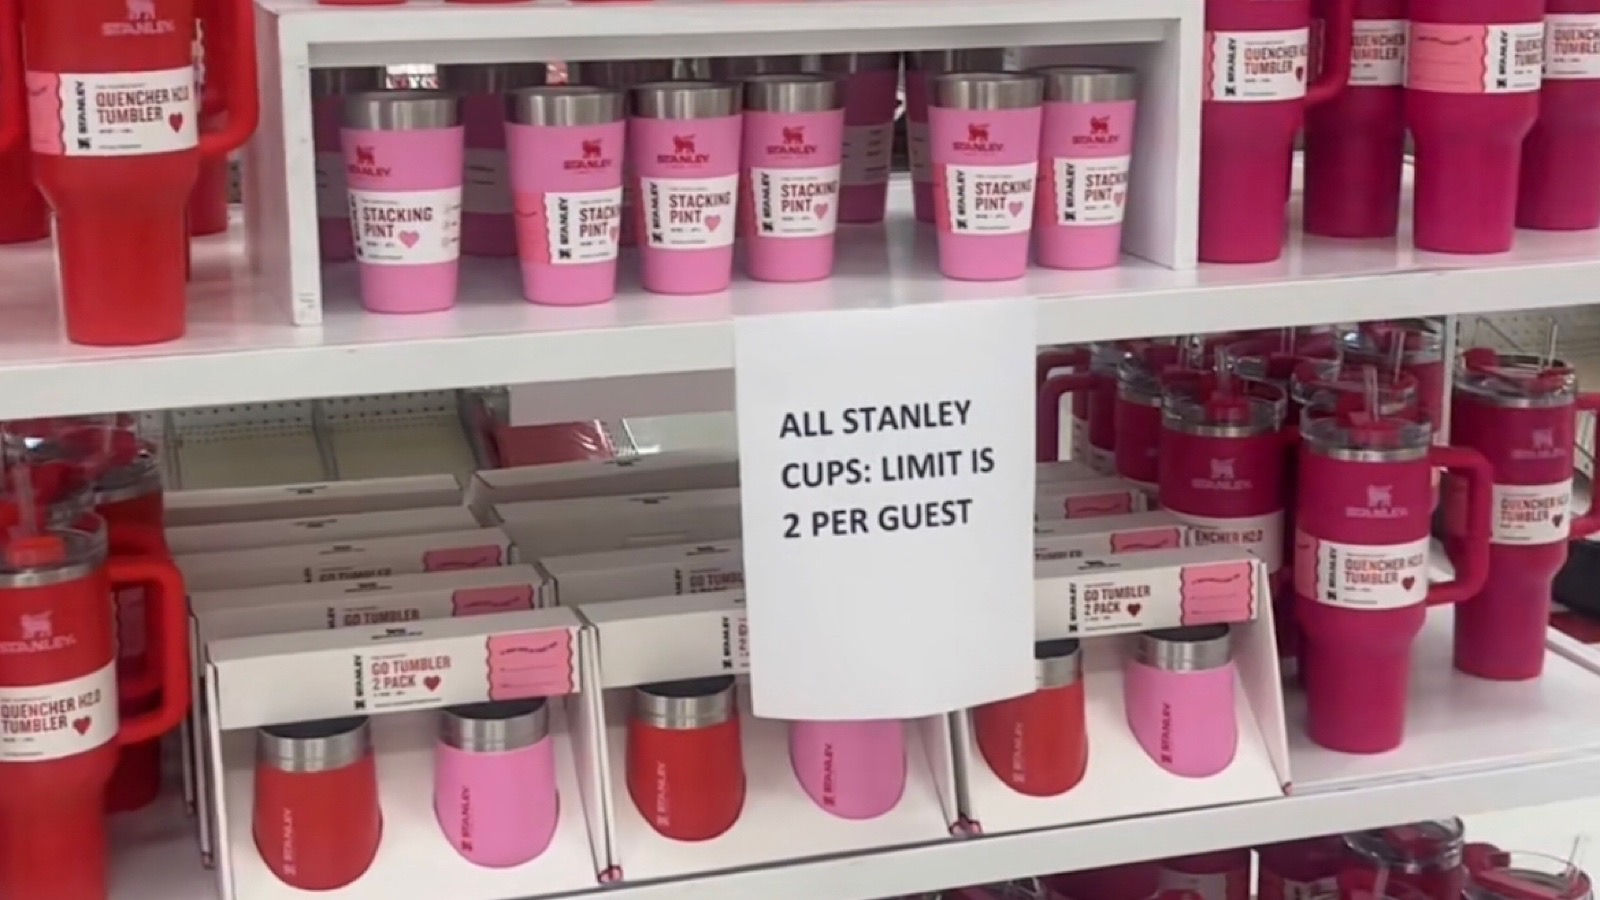 Target customers upset with sold out Stanley cups despite purchase